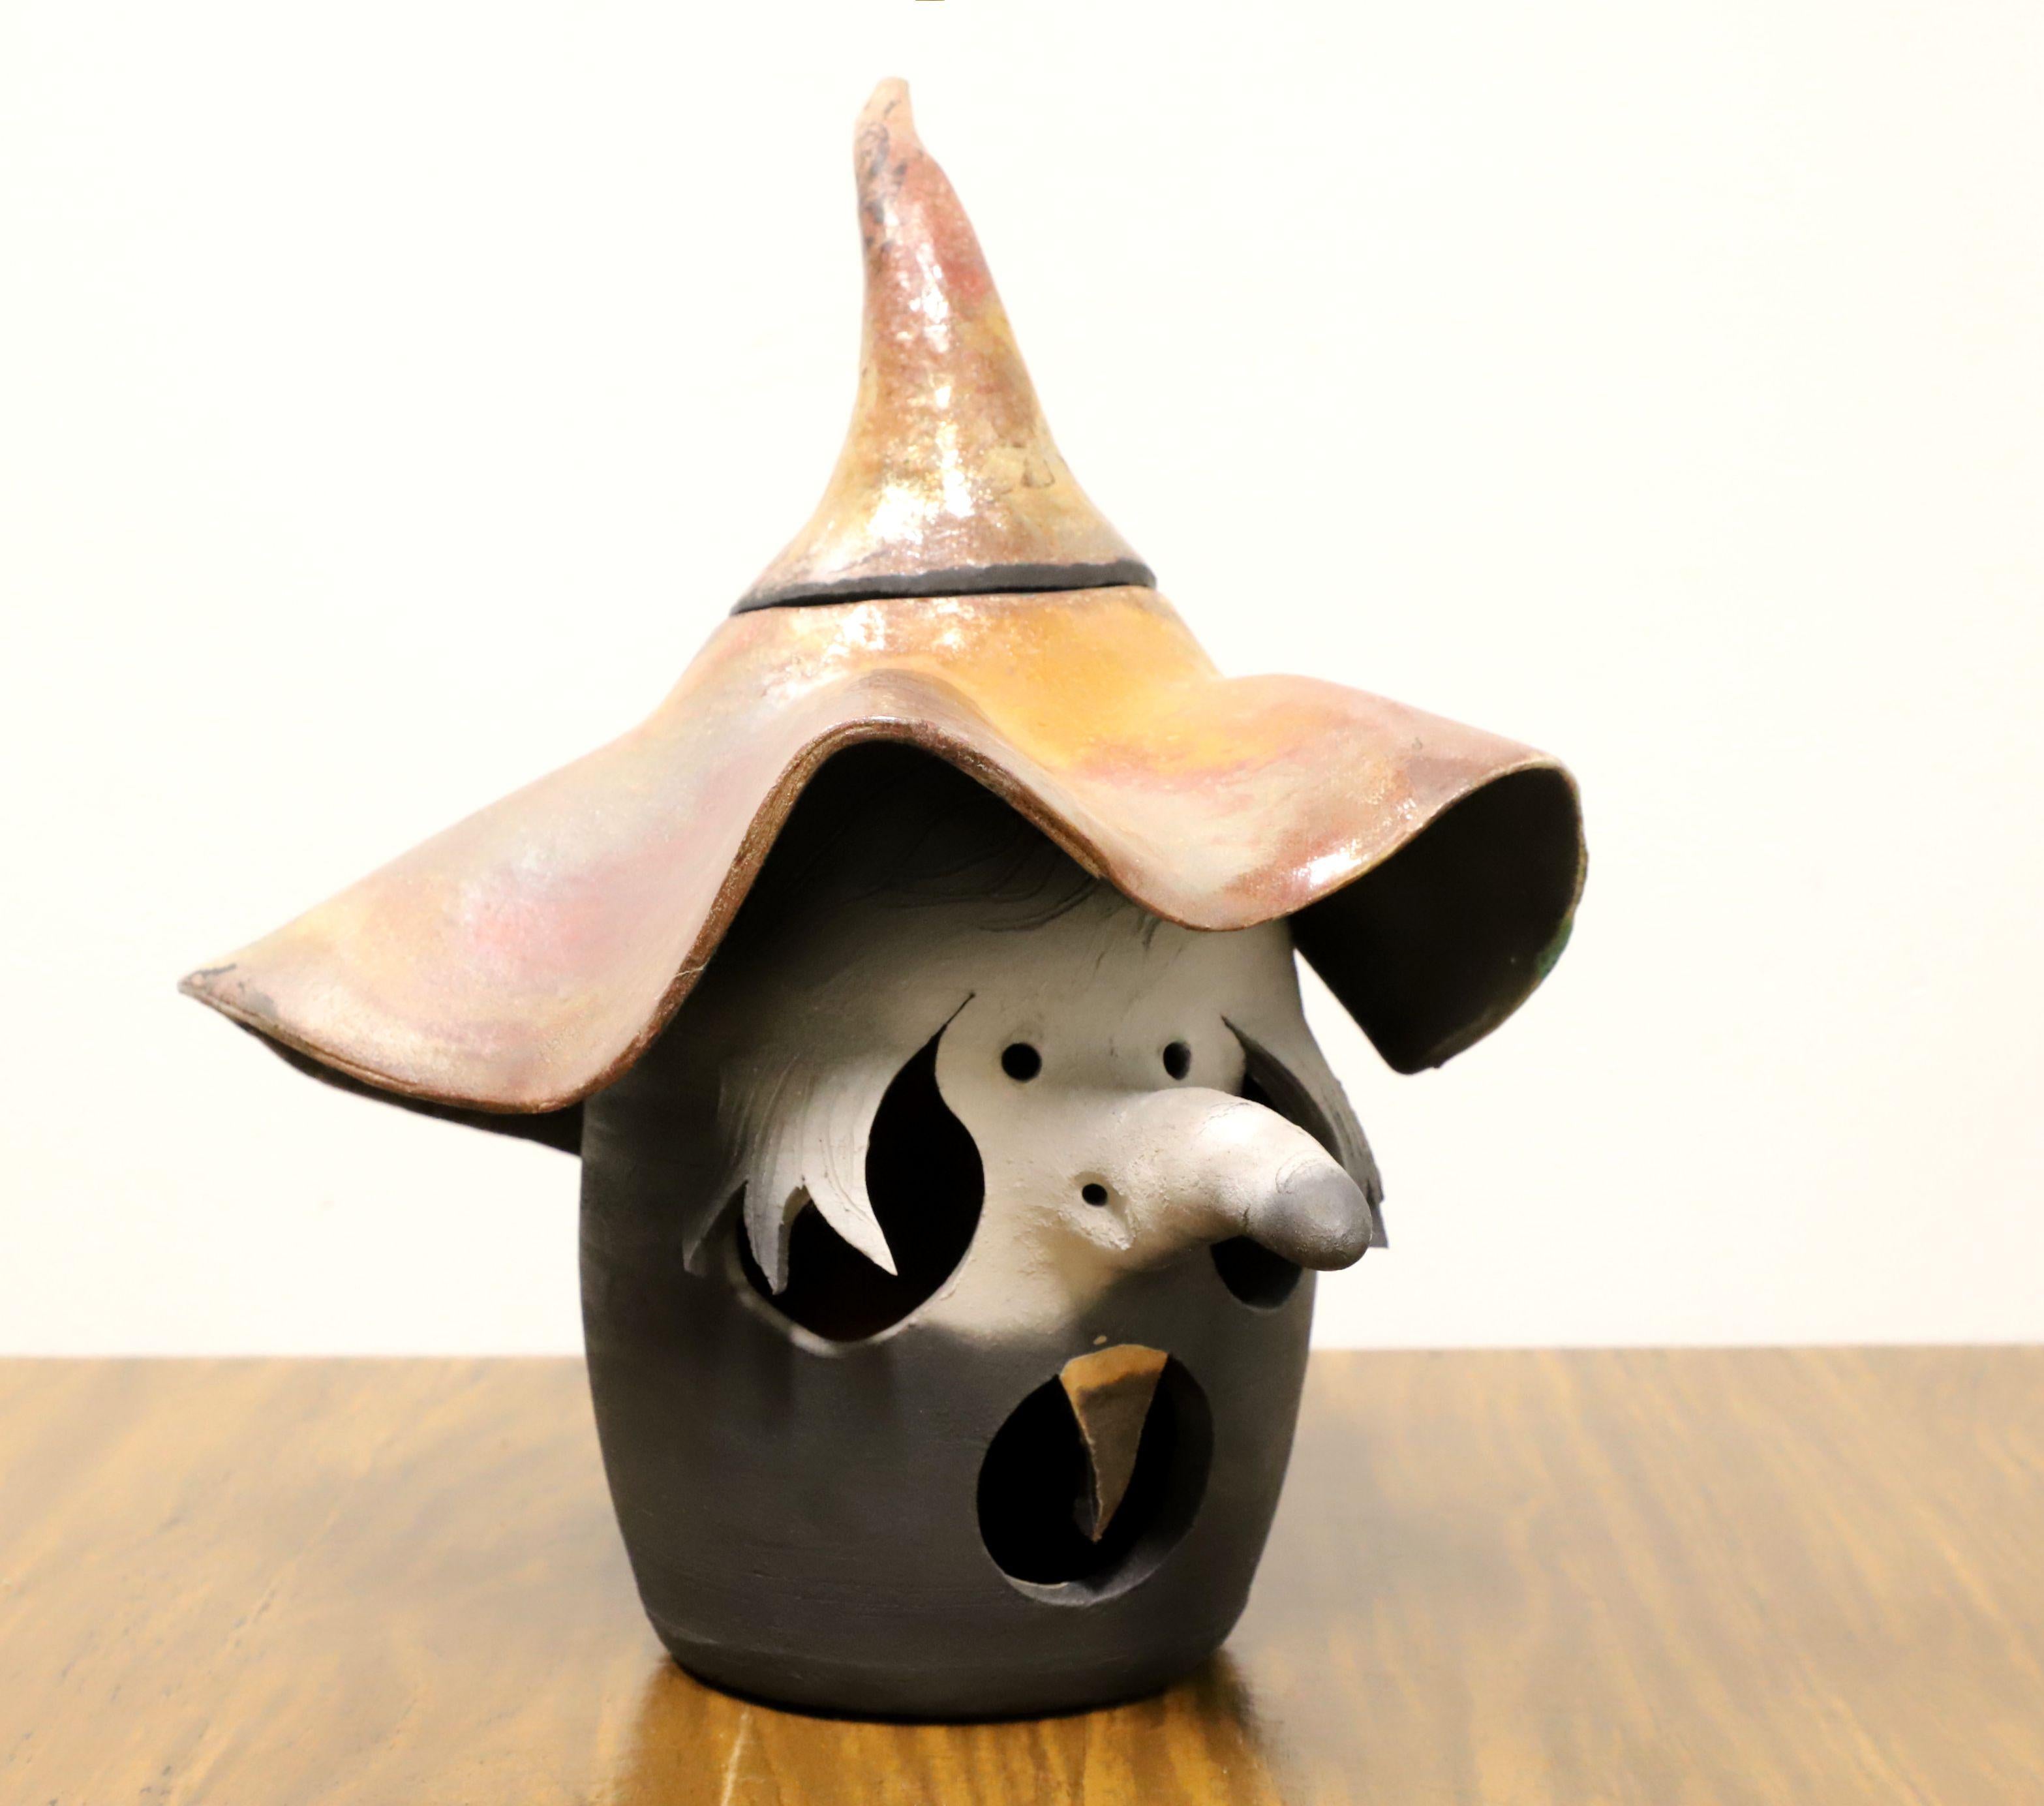 A Late 20th century pottery witches head with hat jack-o-lantern, artist unknown. Ceramic pottery with glaze. Could be used with a candle. Likely crafted in the USA.

Measures: 10.5w 12.25d 13h, Weighs Approximately: 5 lb

Exceptionally good